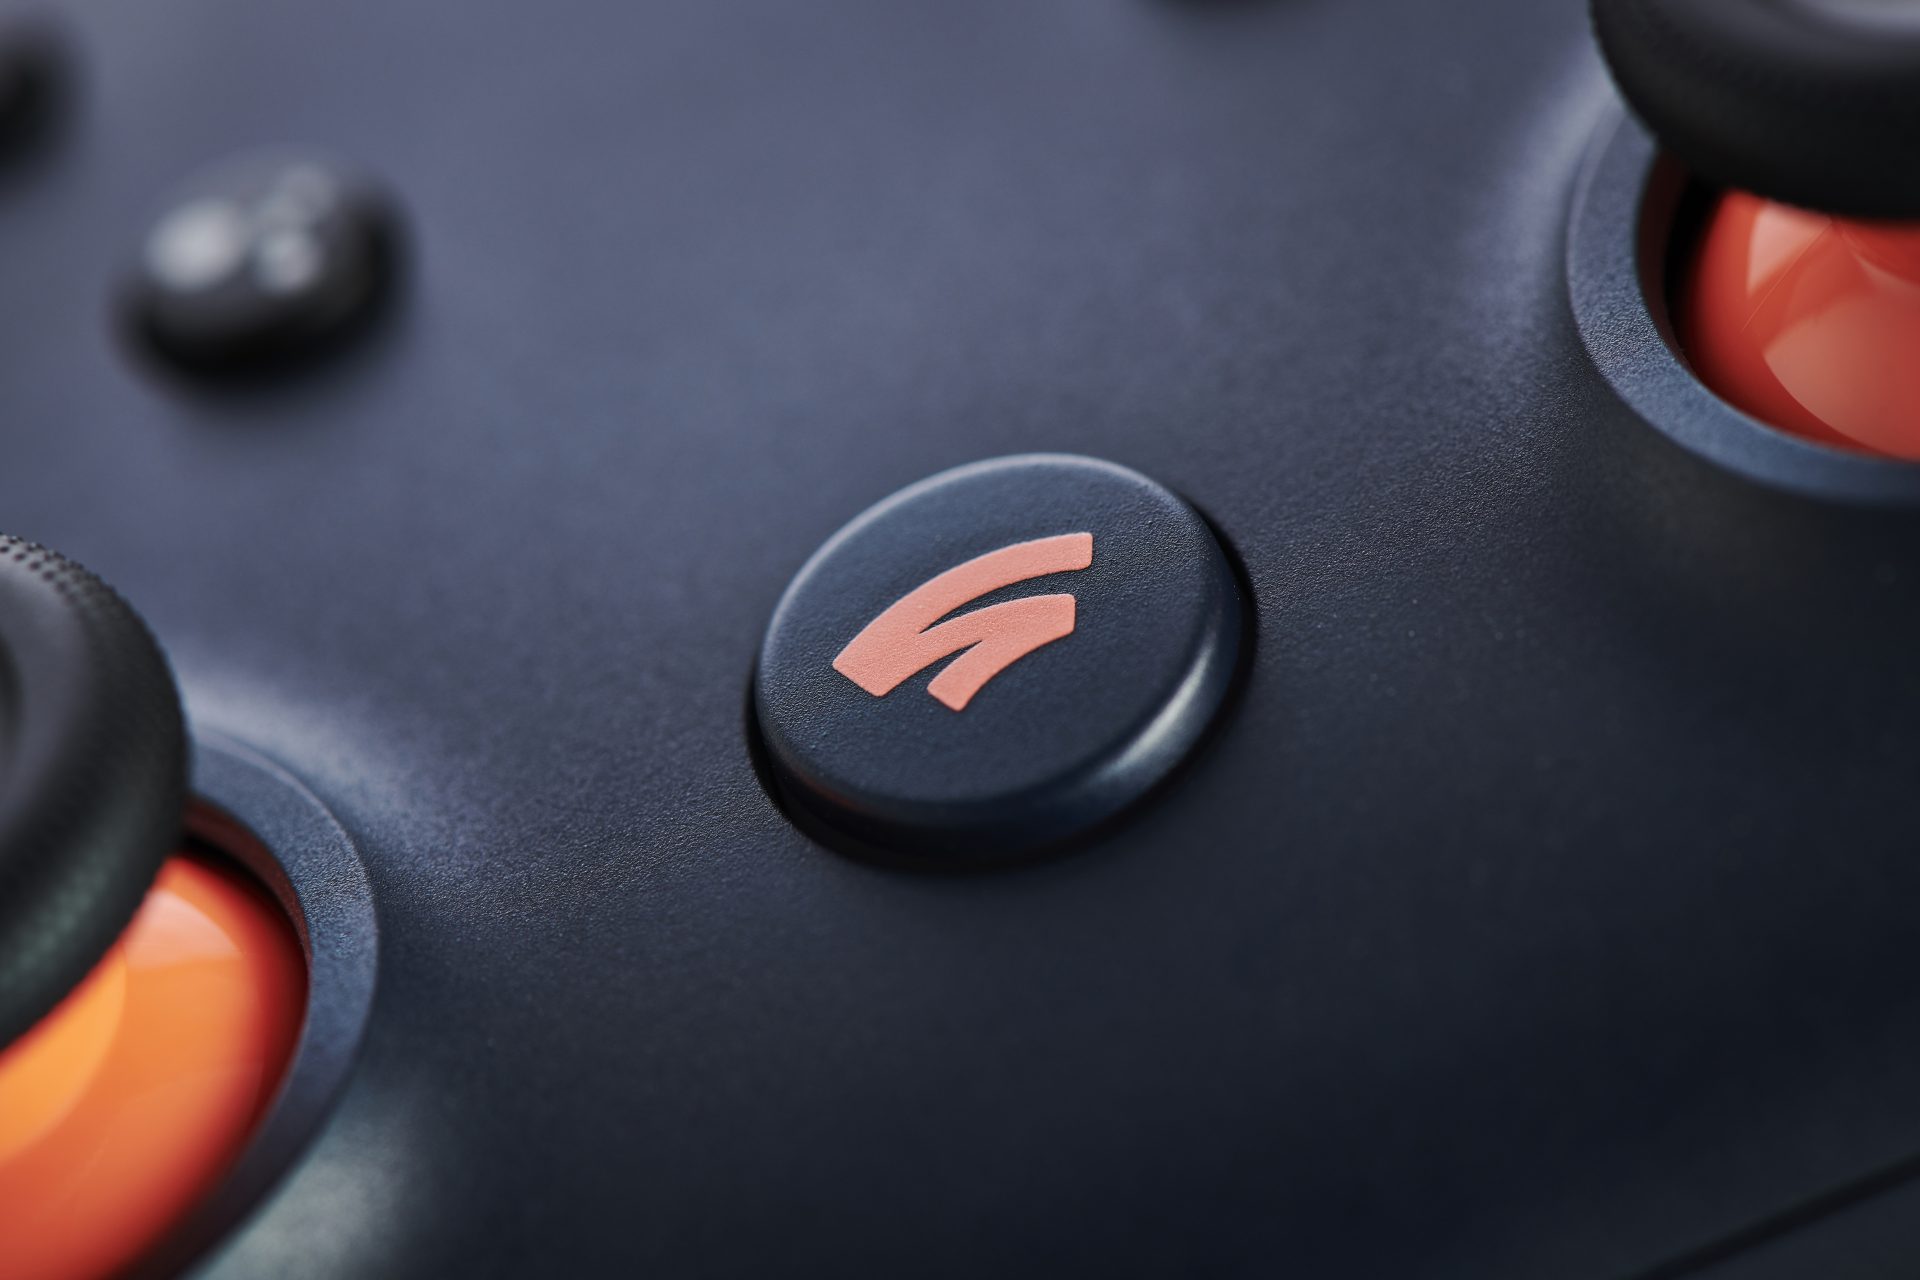 Google Stadia introduces free trials with its have ‘Hey Engineer’ sport